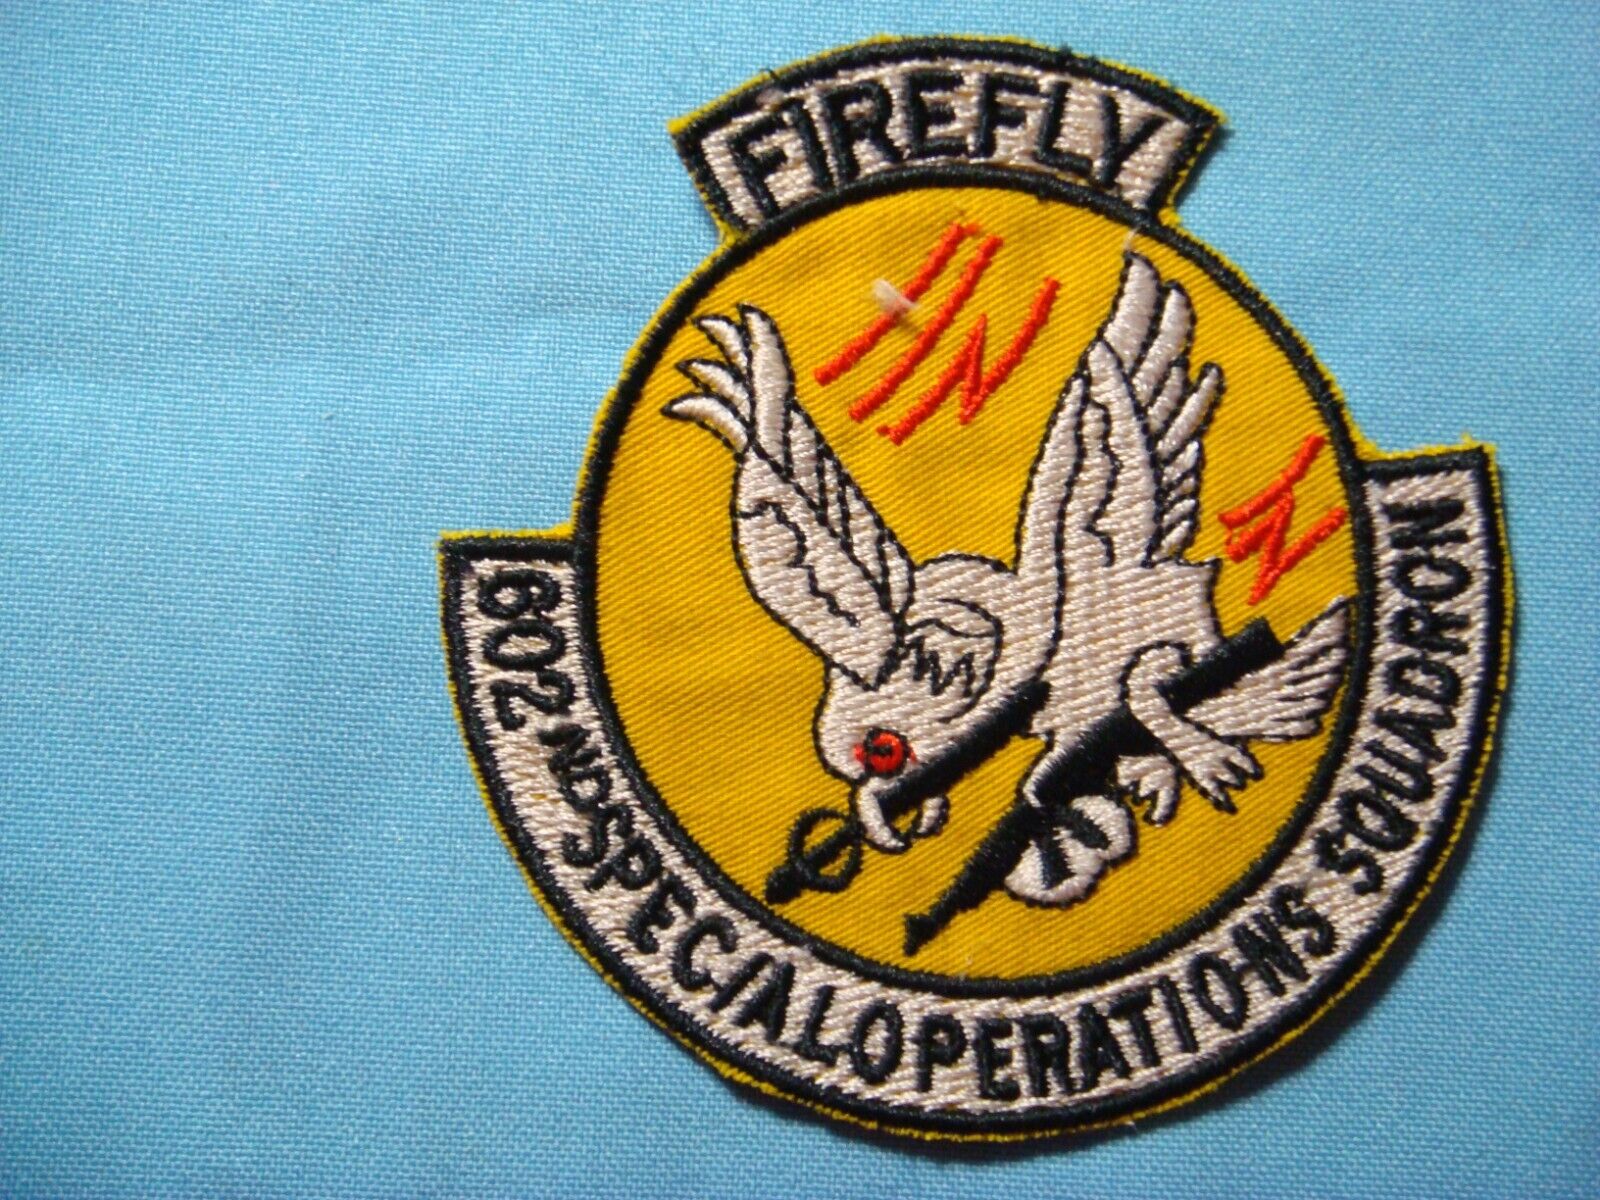 VIETNAM WAR PATCH, US 602nd SPECIAL OPERATIONS SQUADRON  FIRE FLY